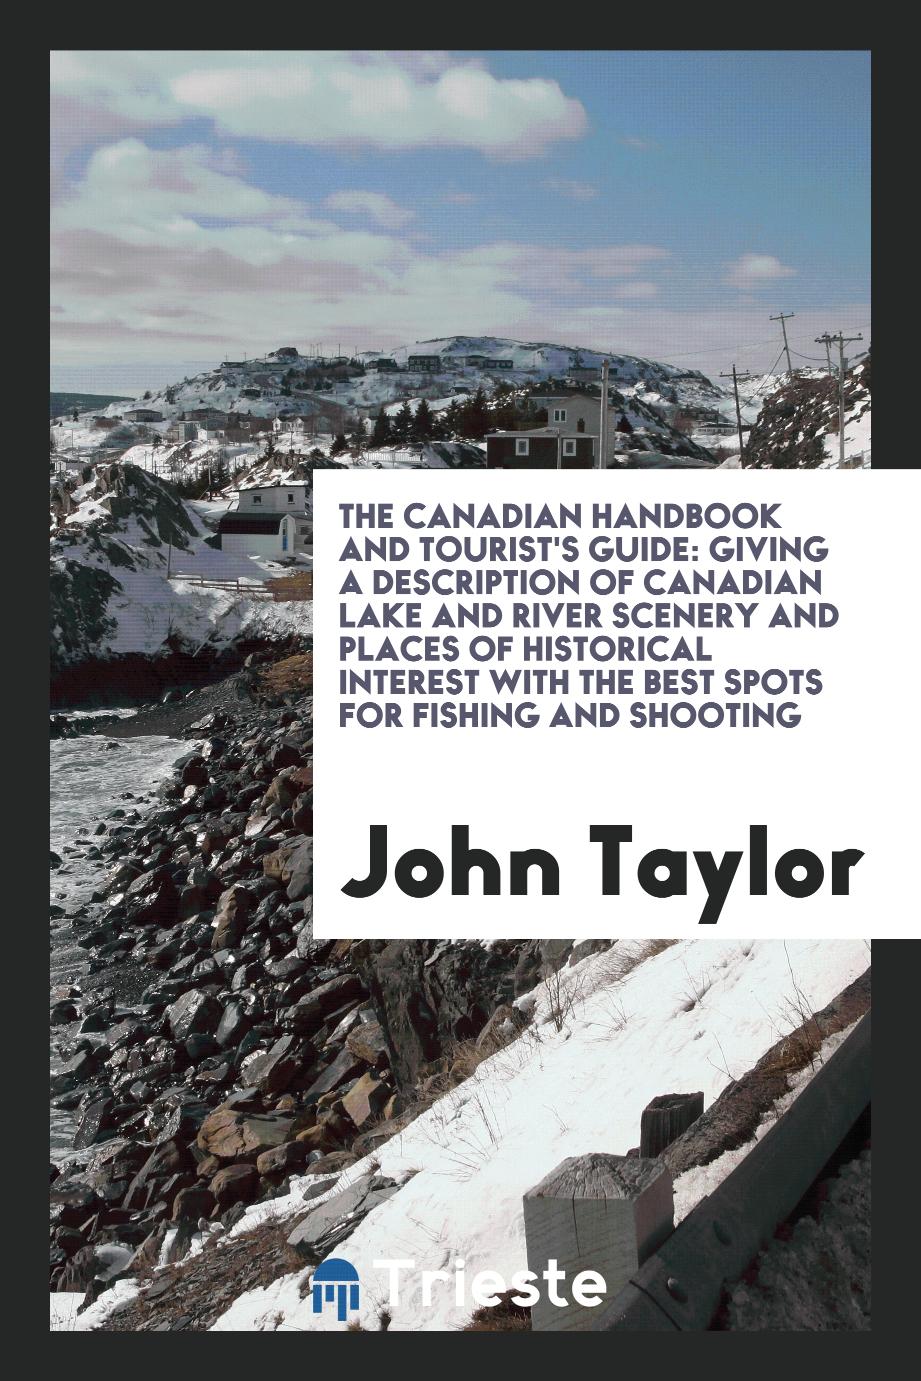 John Taylor - The Canadian Handbook and Tourist's Guide: Giving a Description of Canadian Lake and River Scenery and Places of Historical Interest with the Best Spots for Fishing and Shooting